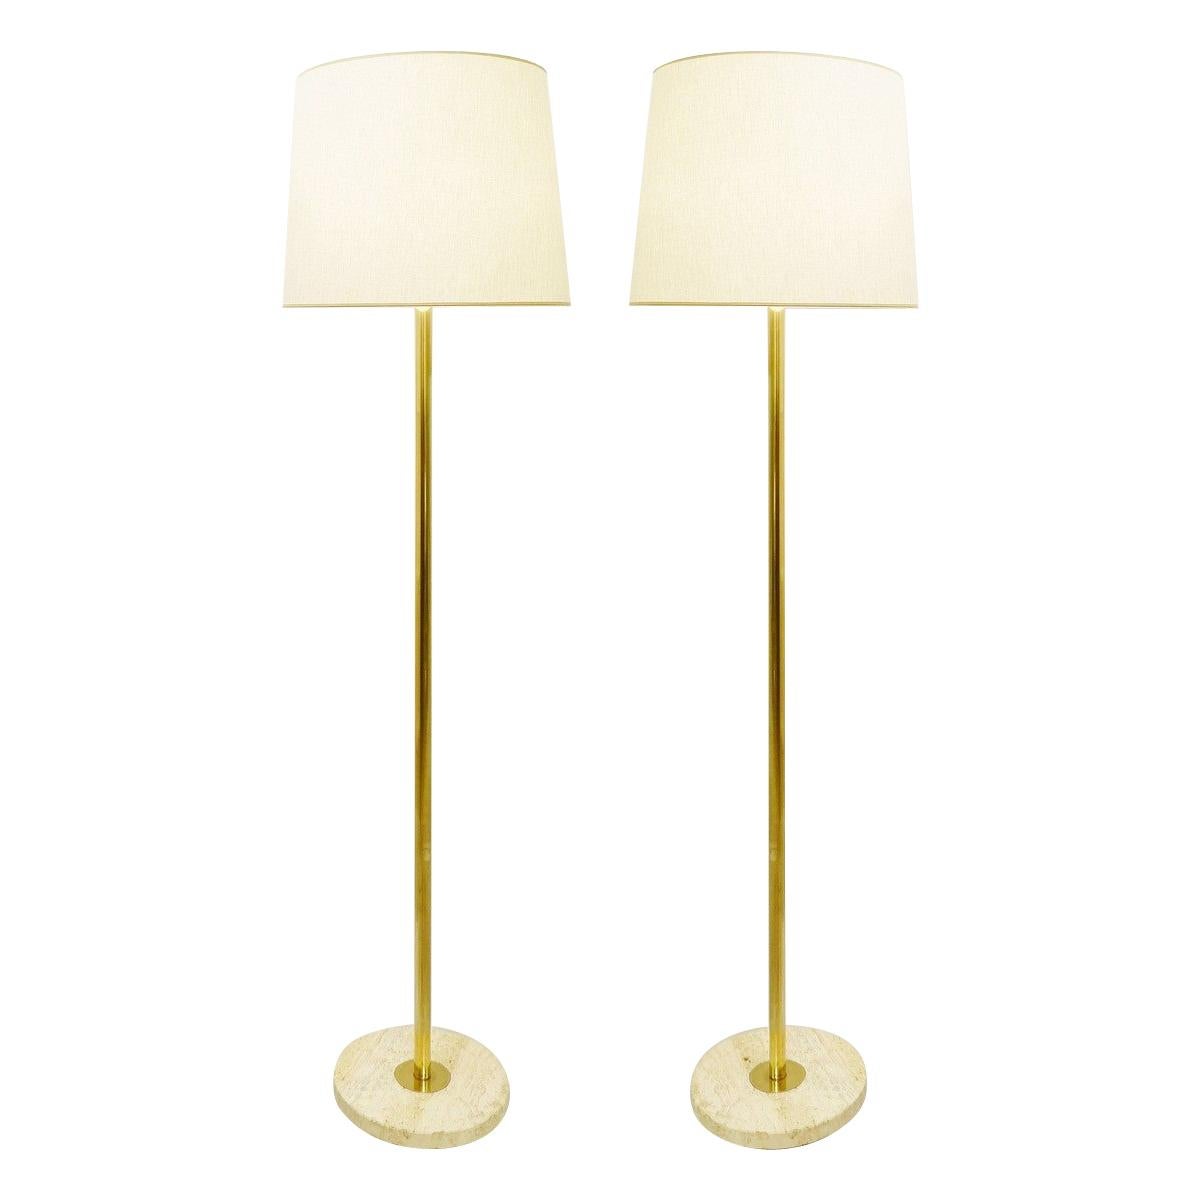 Pair of Brass and Travertine Base Floor Lamps